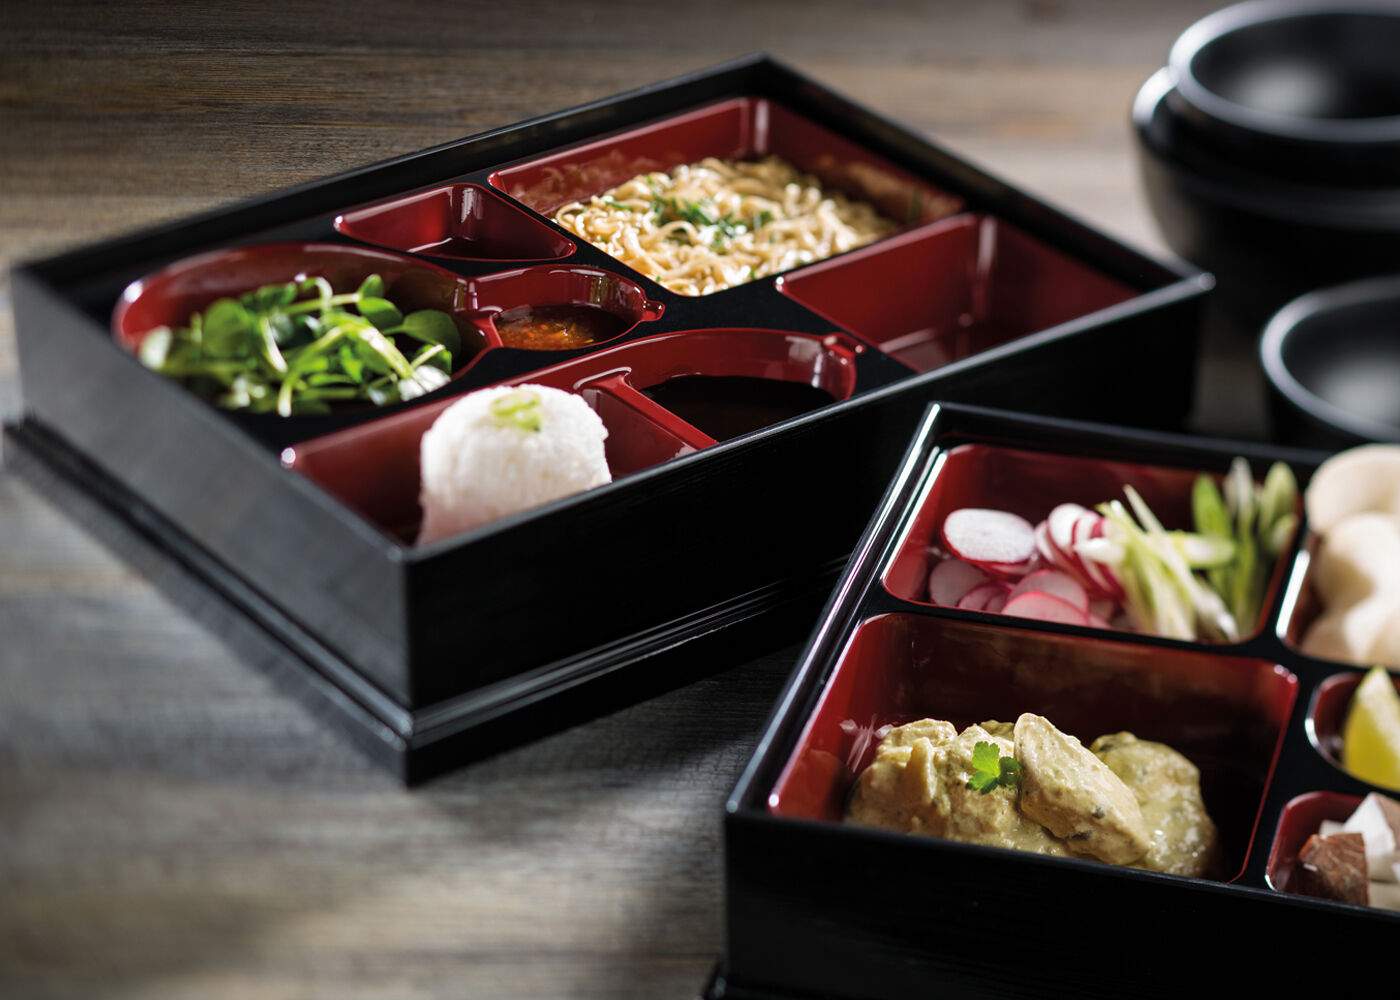 Luxury Bento Boxes filled with Asian food